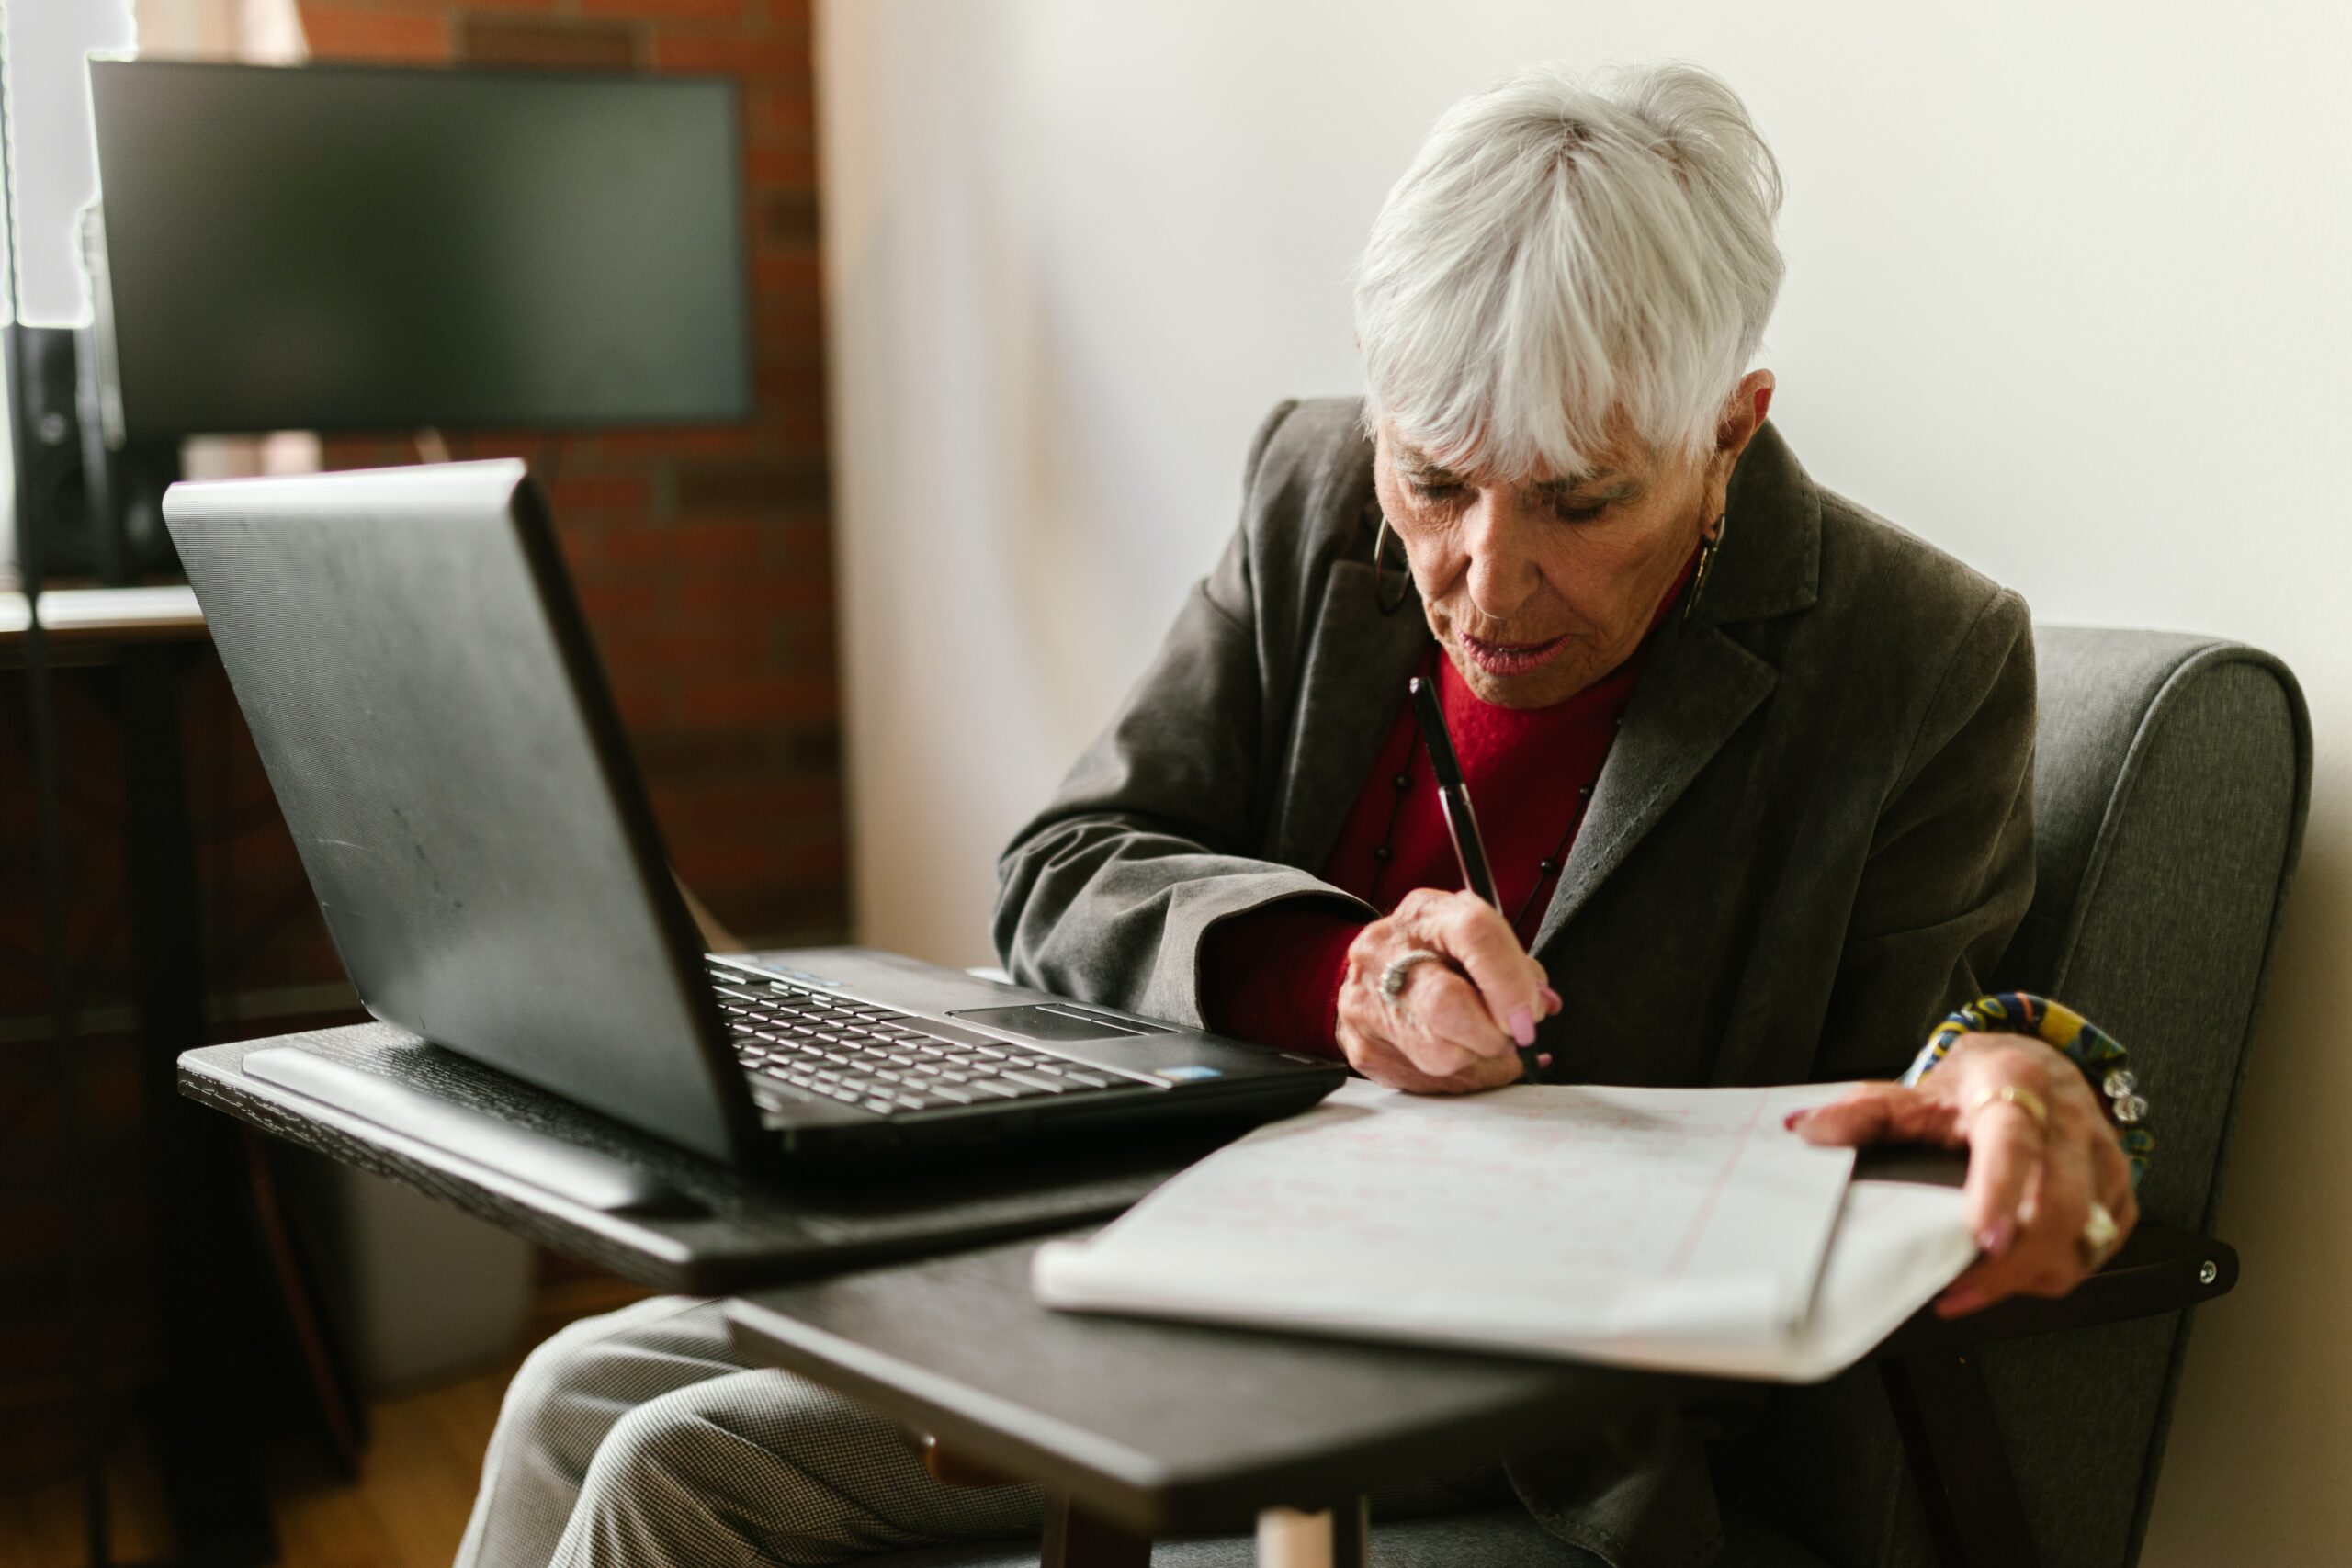 Computer Courses for Seniors: Free Technology Classes to Keep You Connected